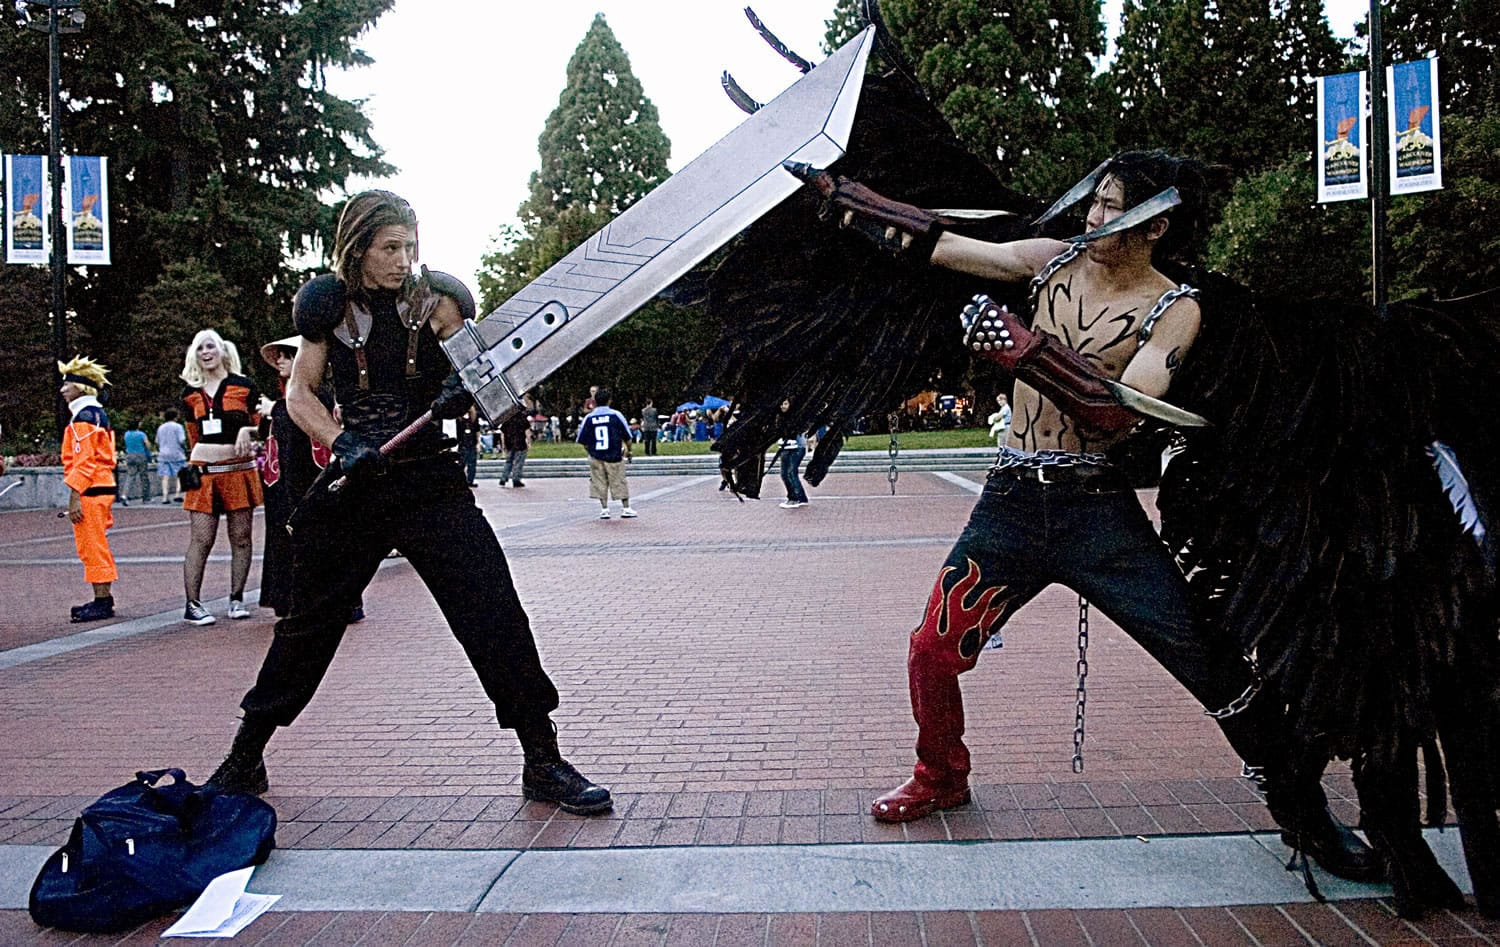 Chris Menges of Sequim,  left, plays Angeal from Final Fantasy 7: Crisis Core, squares off in cosplay with Eugene Cheng of Seattle, playing Devil Jin from the video game Tekken, during the 2007 Kumoricon in Vancouver.